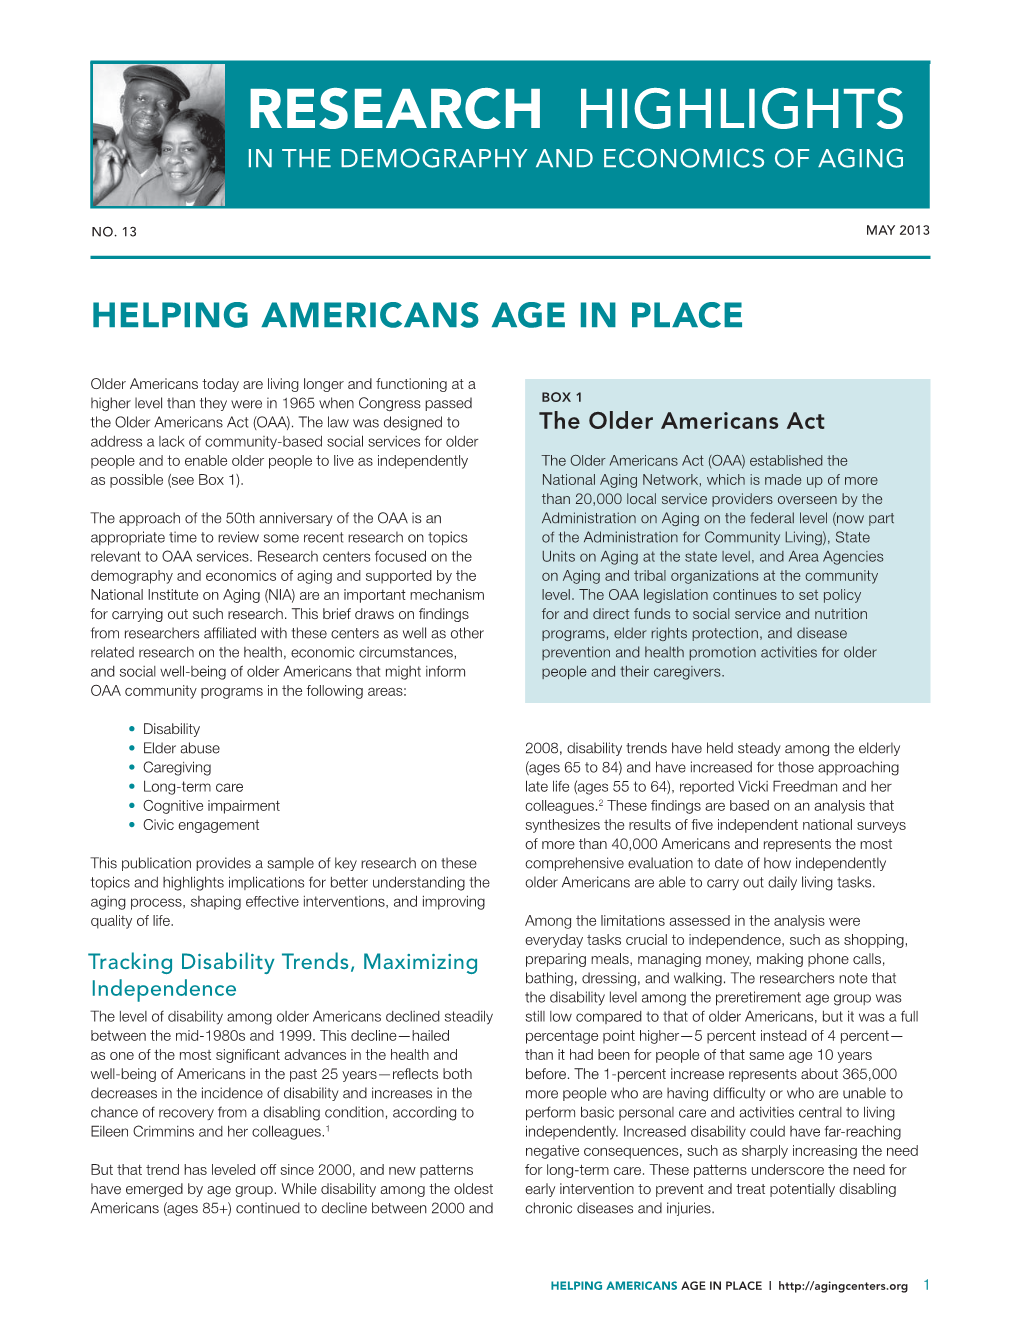 Helping Americans Age in Place. May 2013. #13